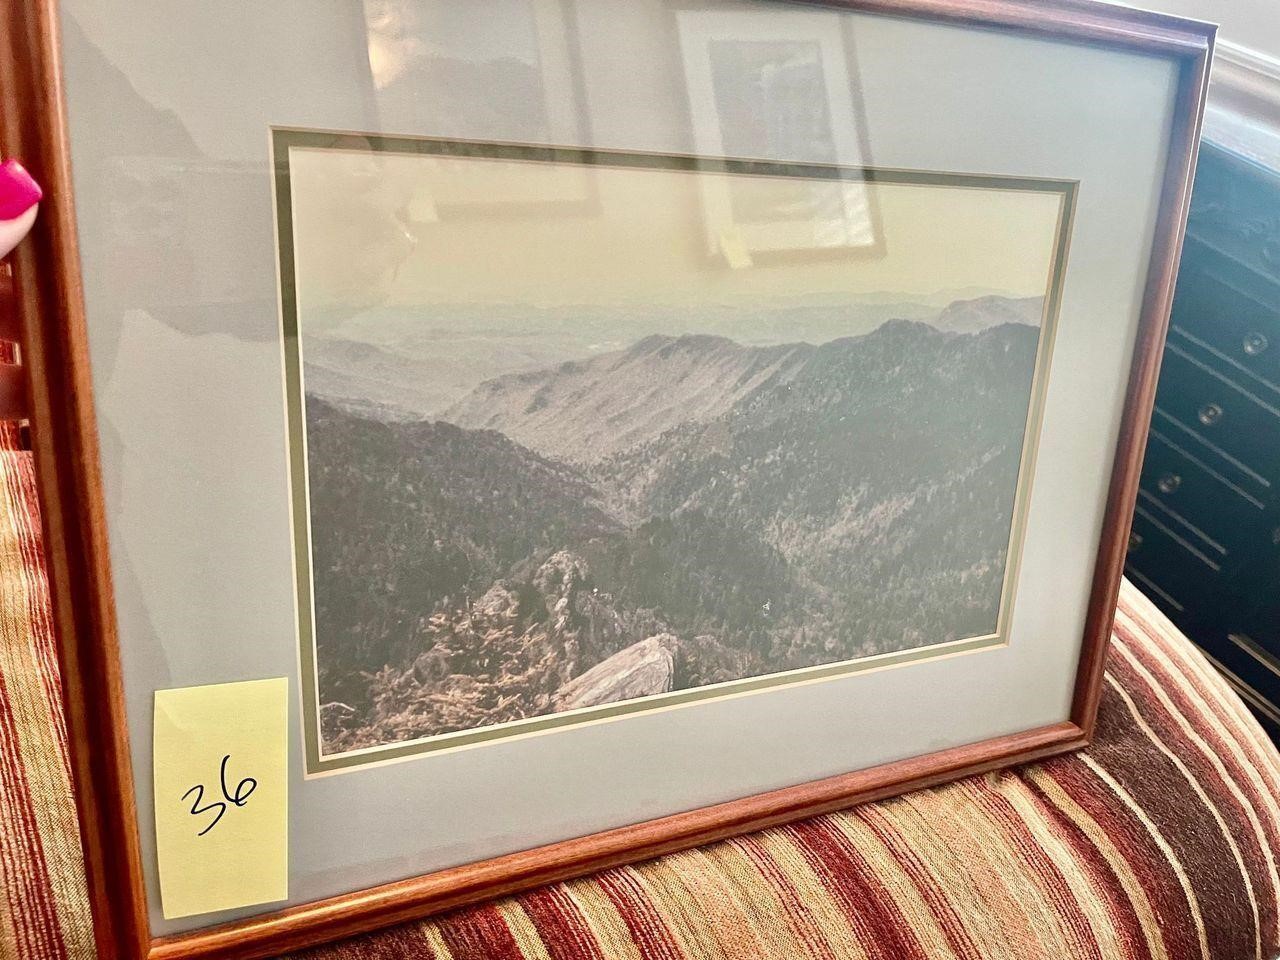 enlarged photographs of mountains etc